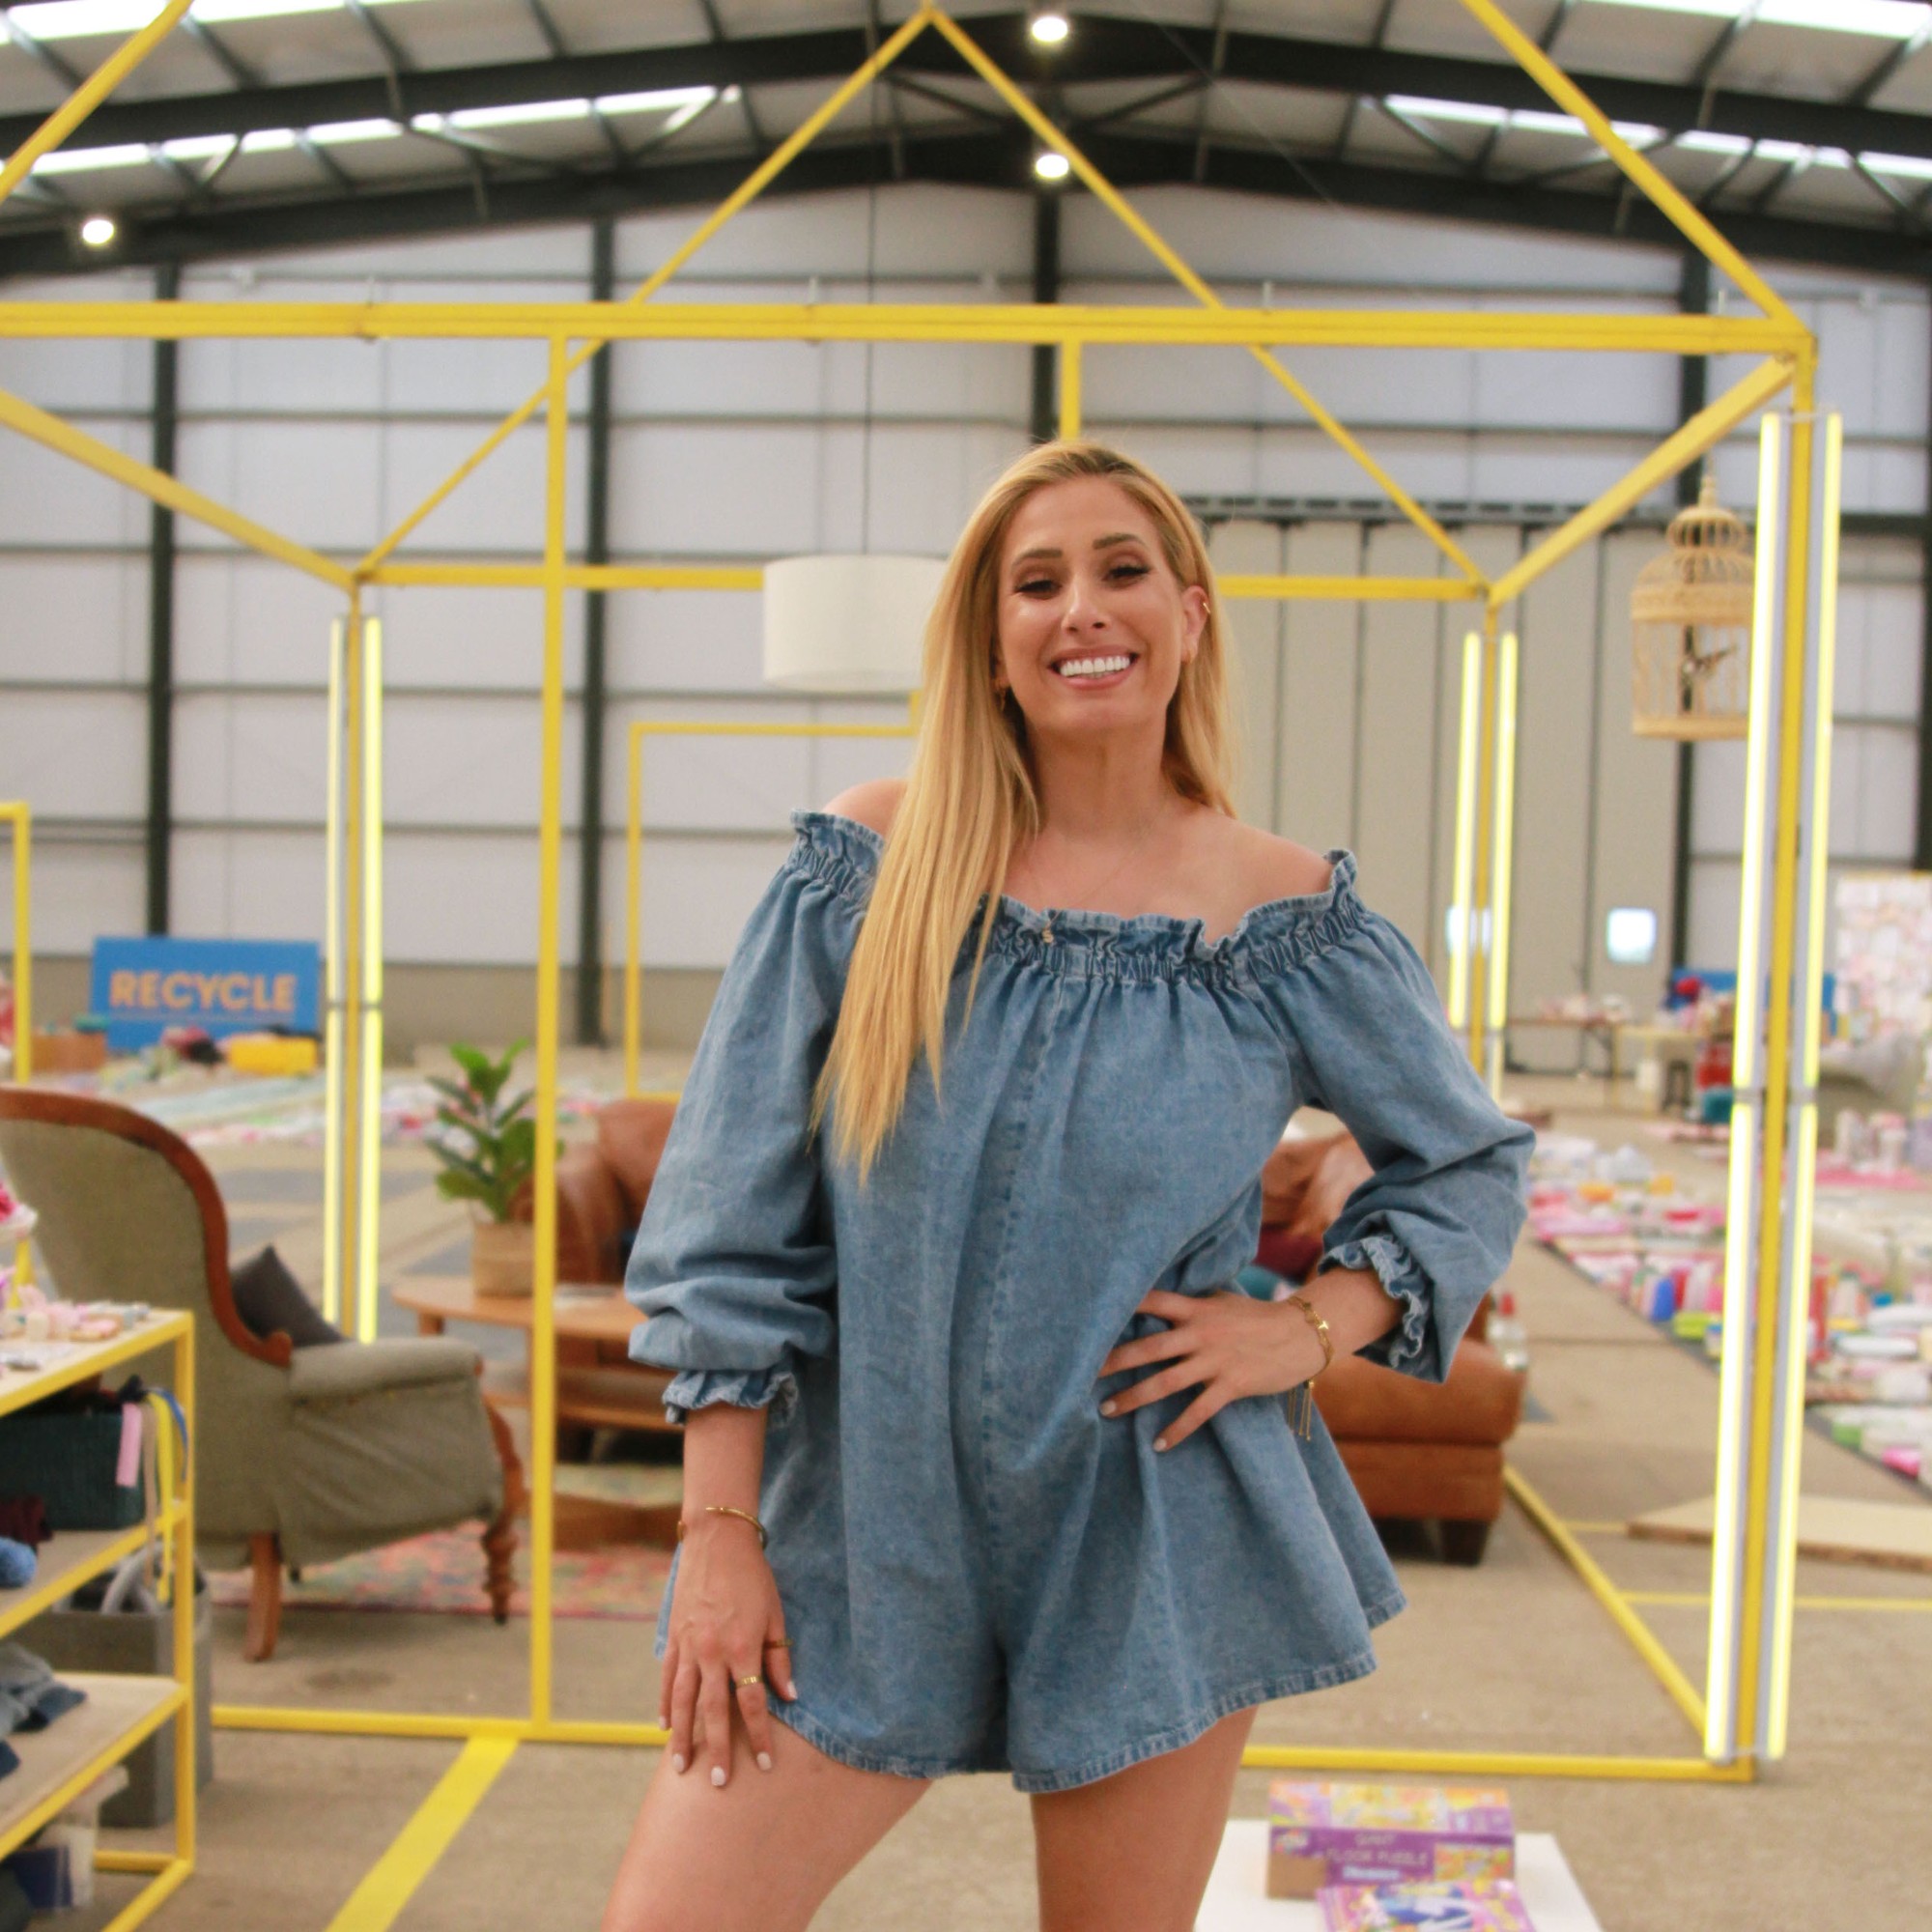 Stacey Solomon in the Sort Your Life Out warehouse